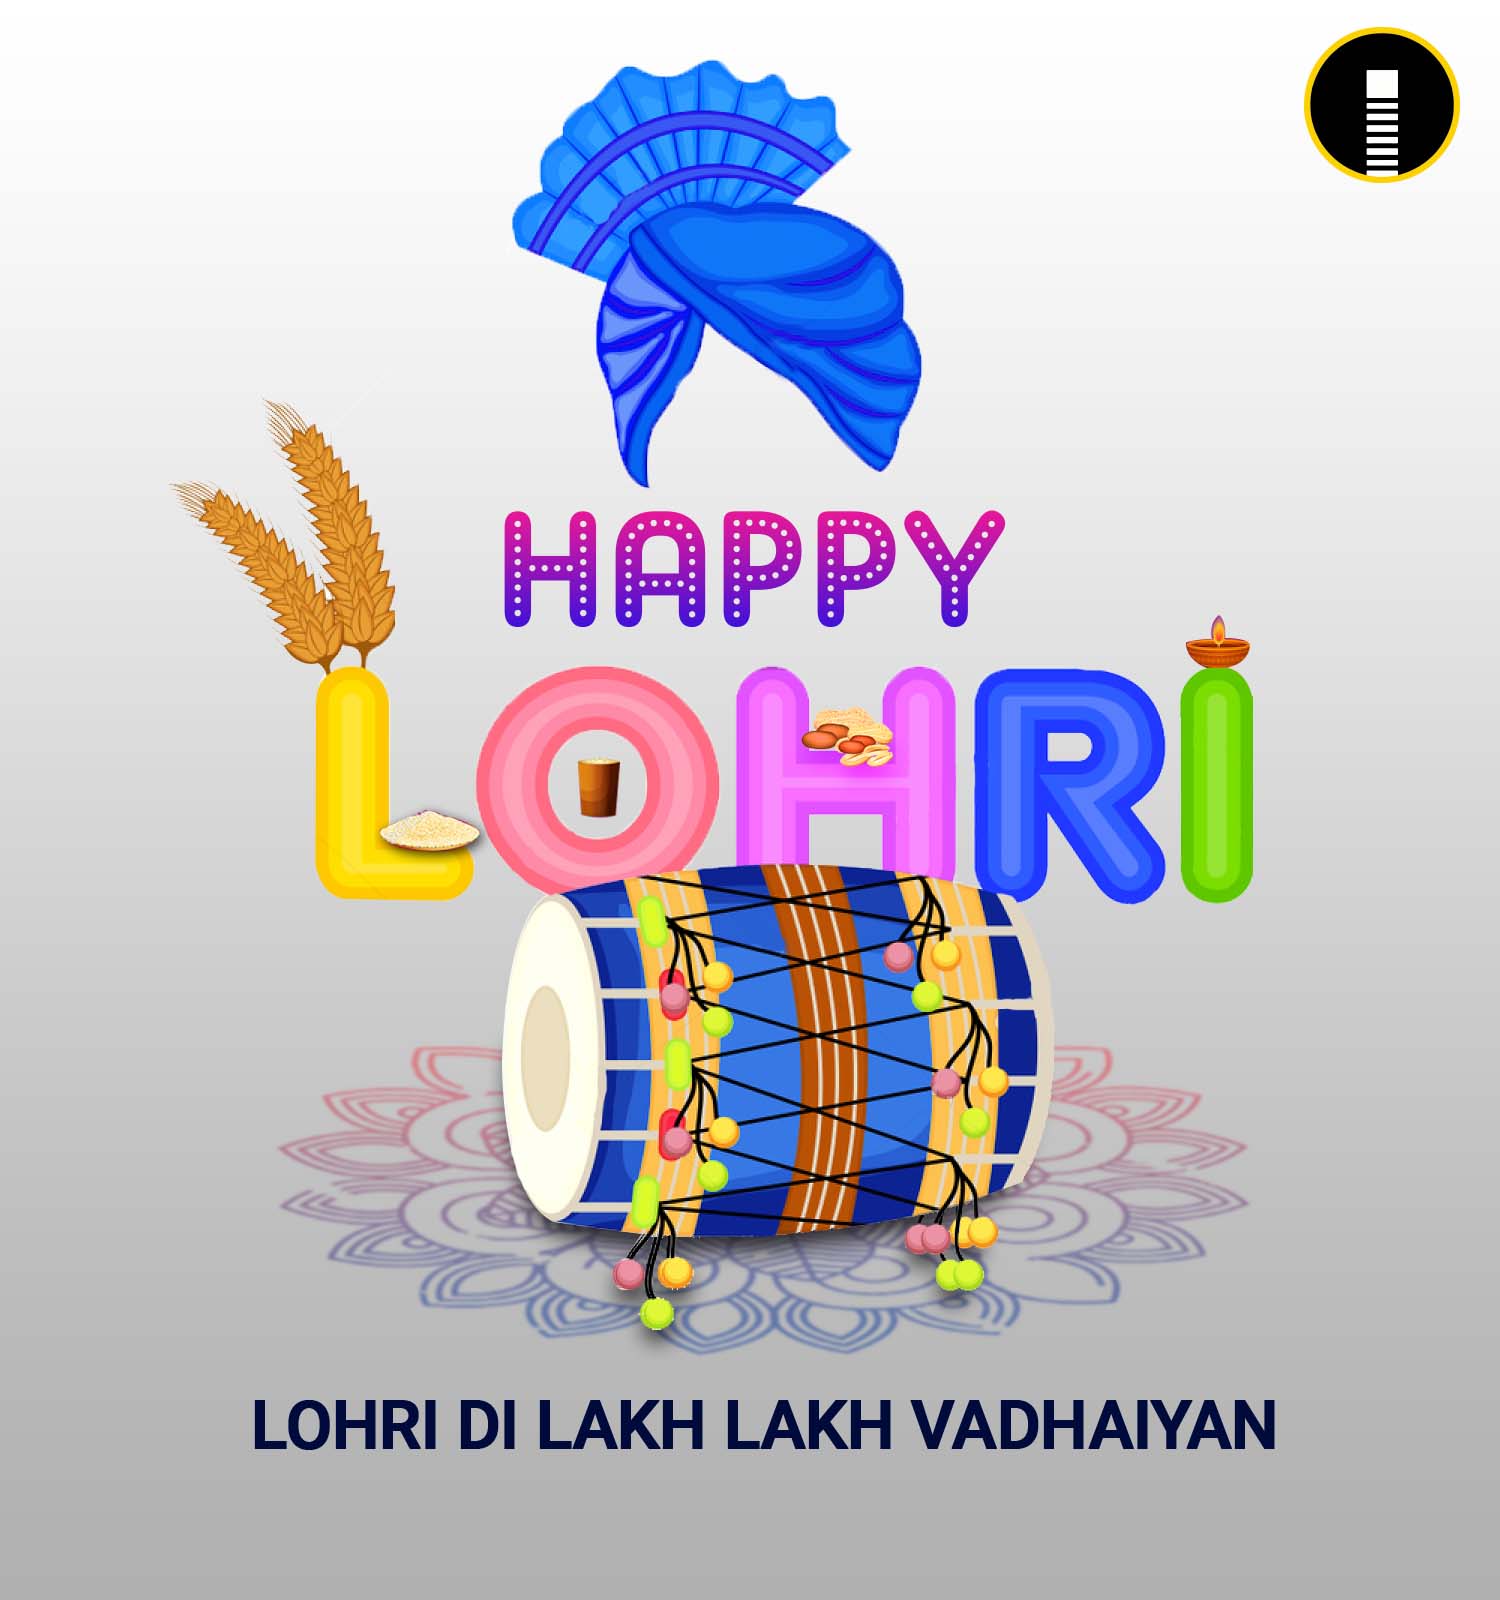 Happy Lohri wishes Greetings background for the festival of Punjab India